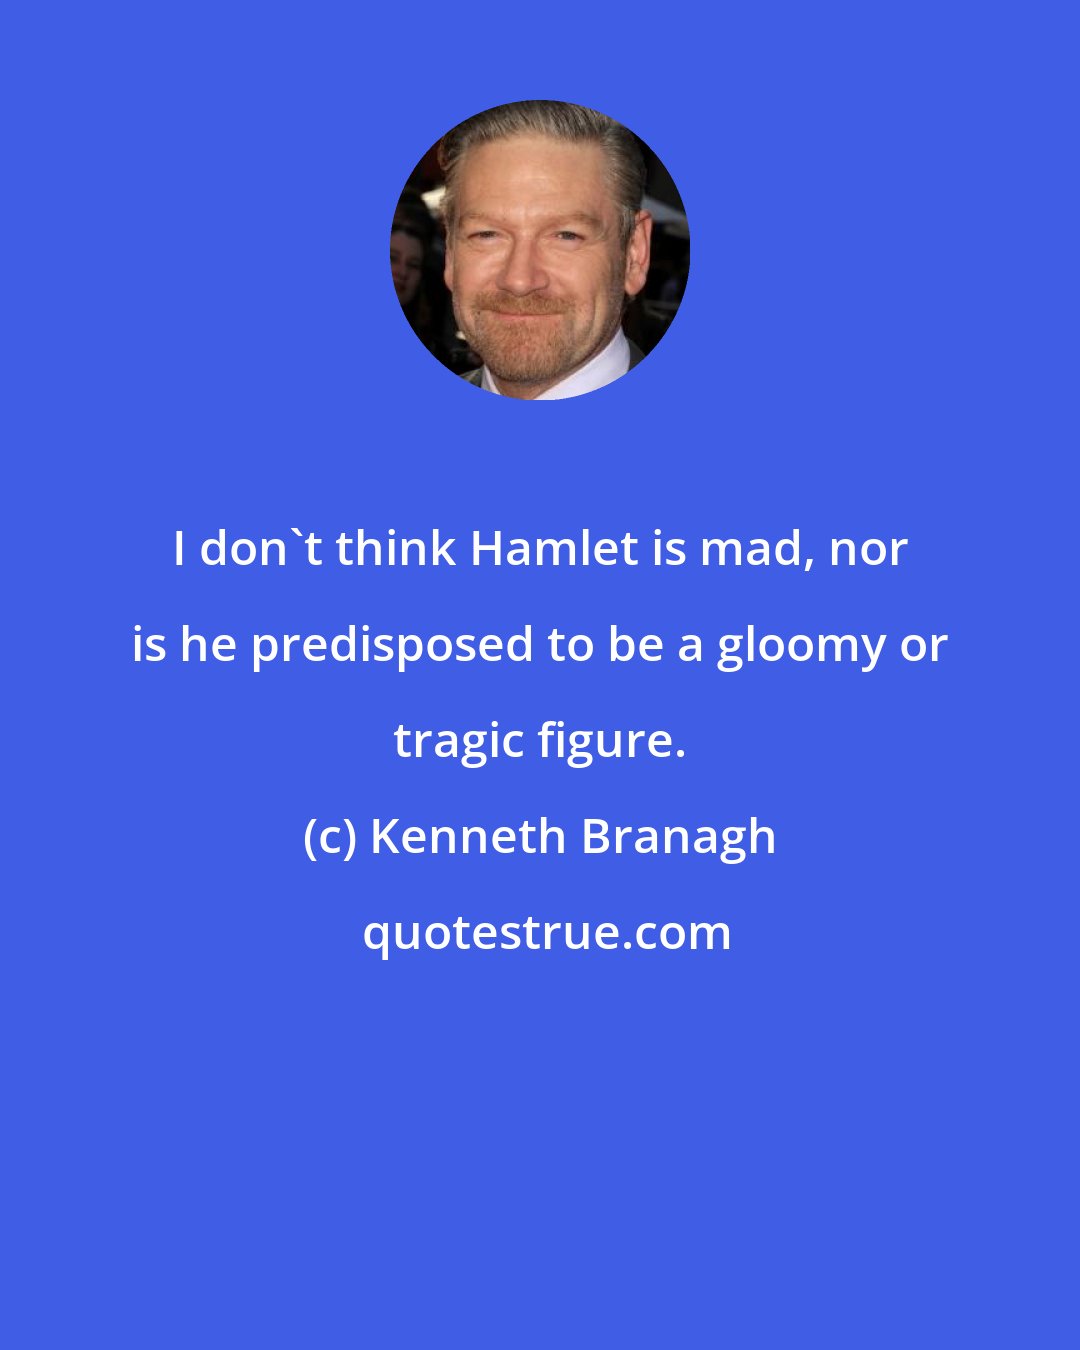 Kenneth Branagh: I don't think Hamlet is mad, nor is he predisposed to be a gloomy or tragic figure.